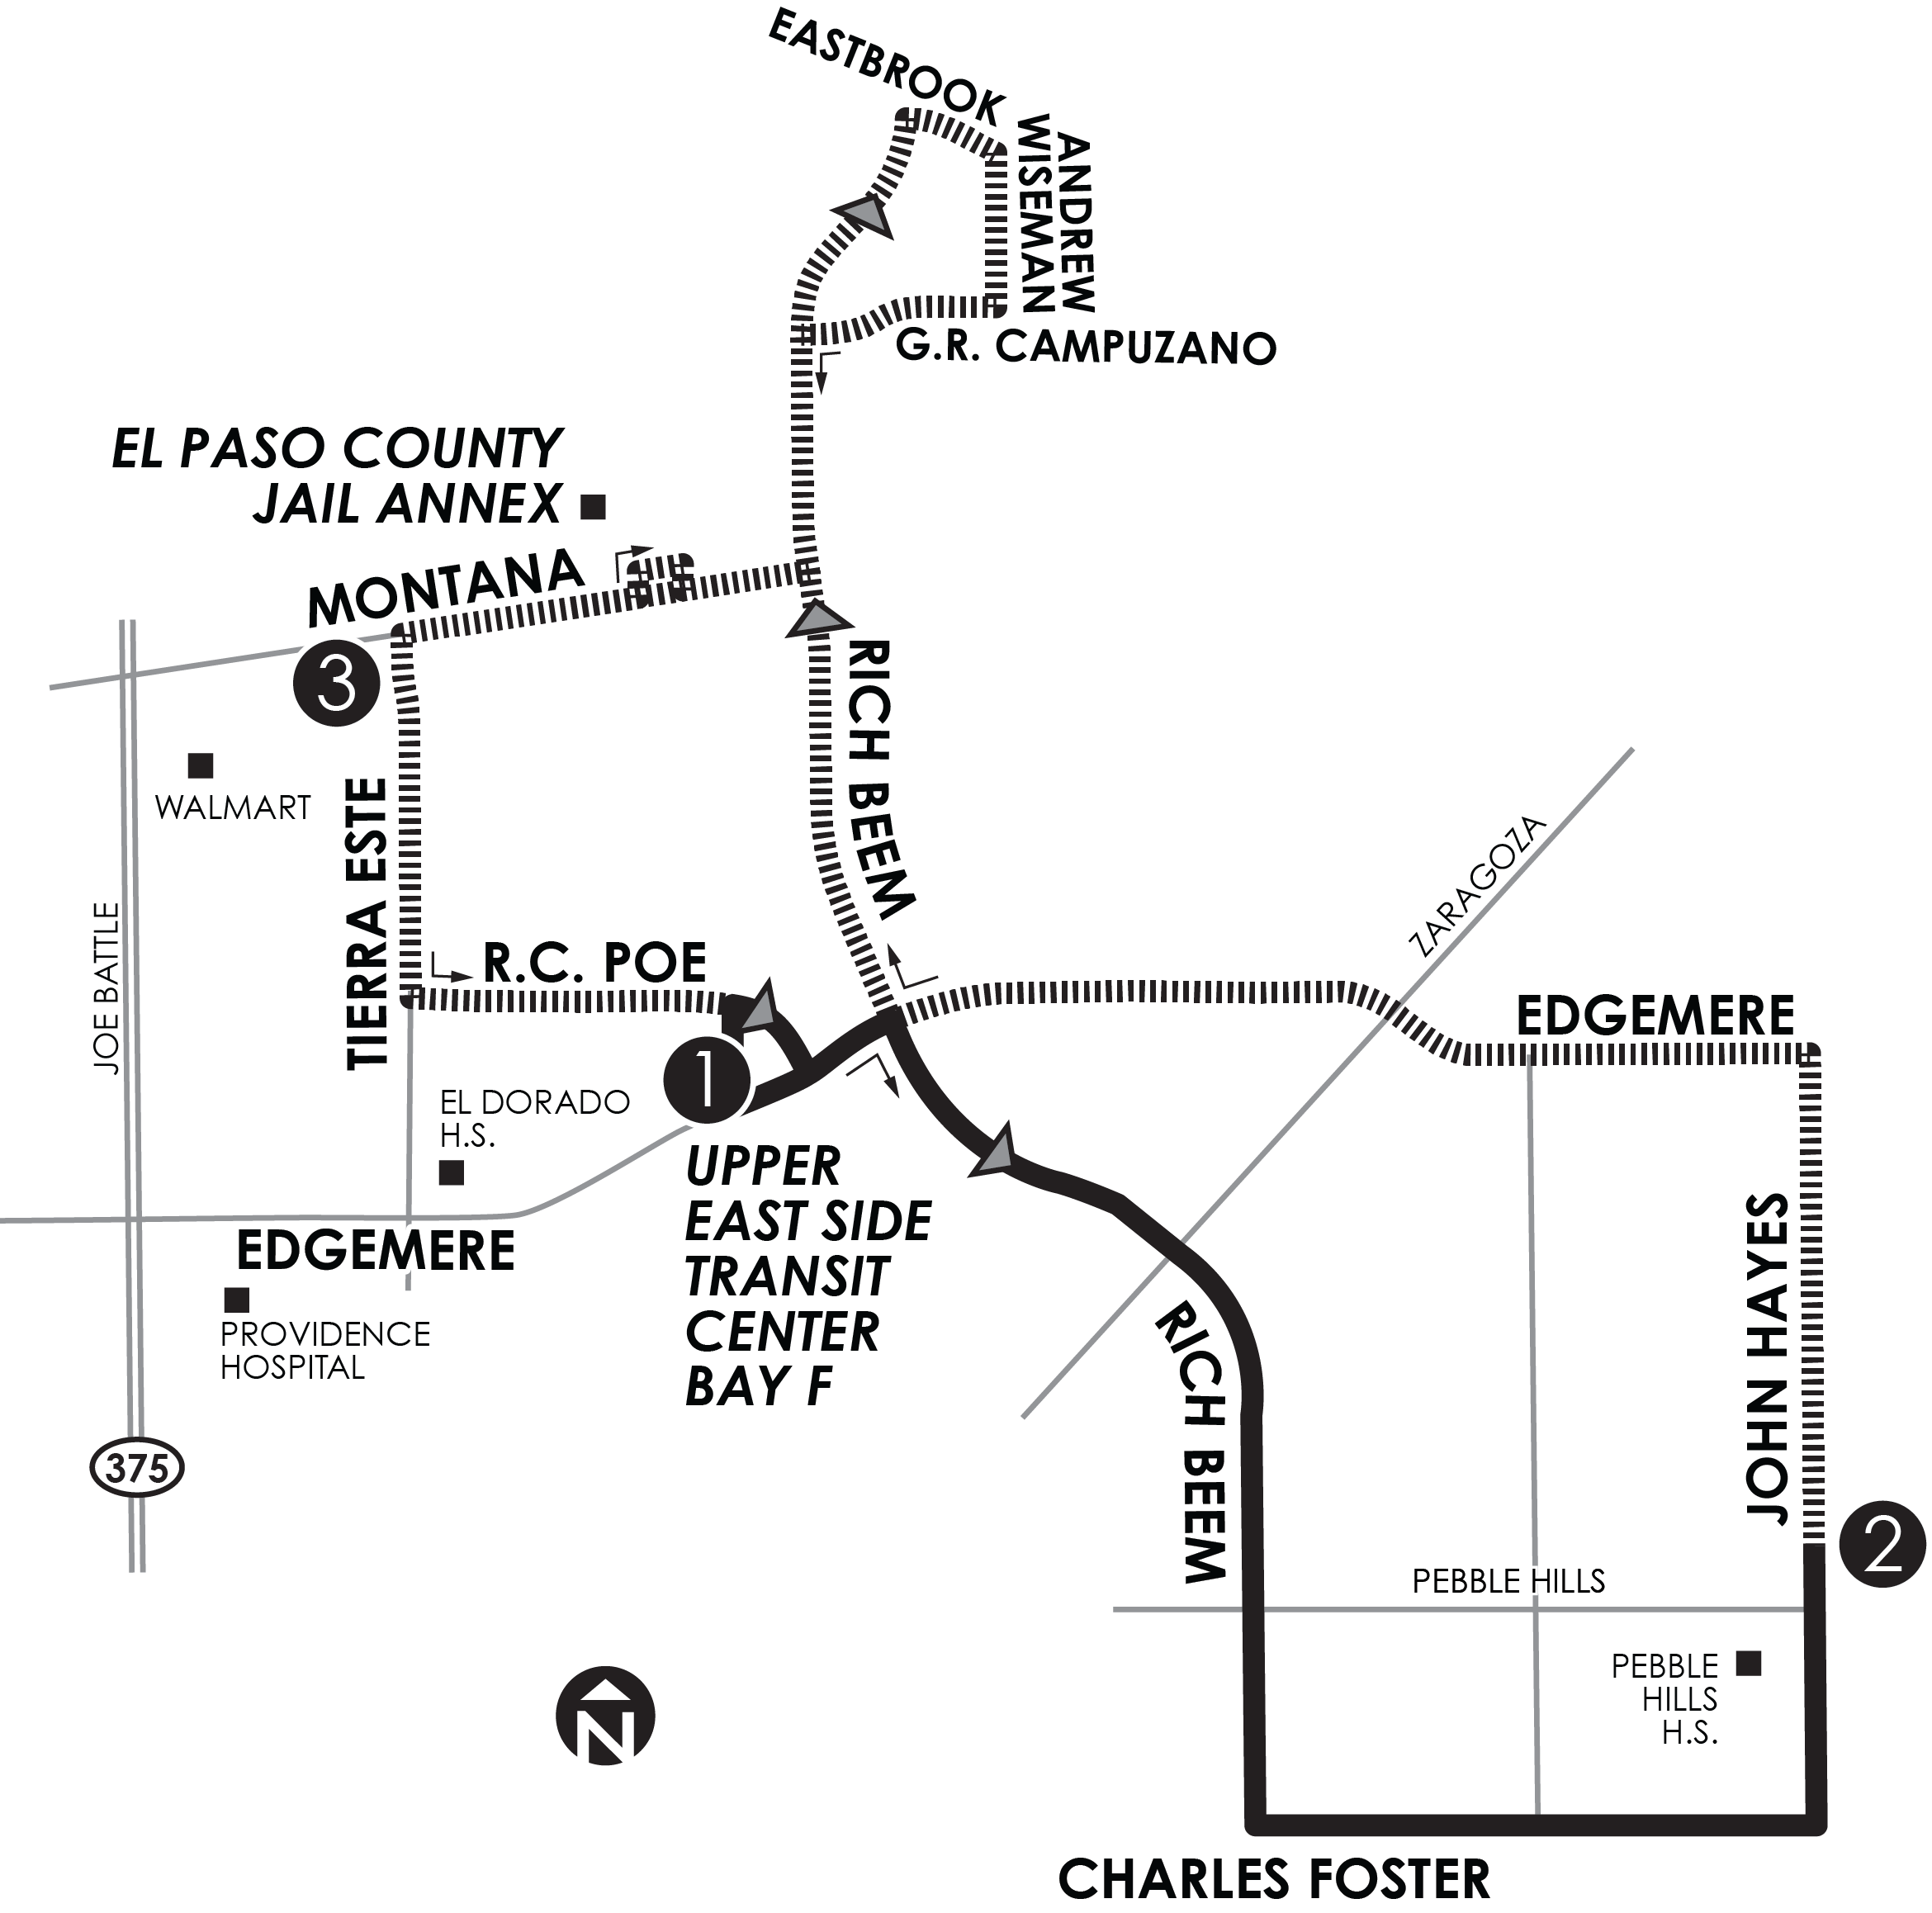 image of route map